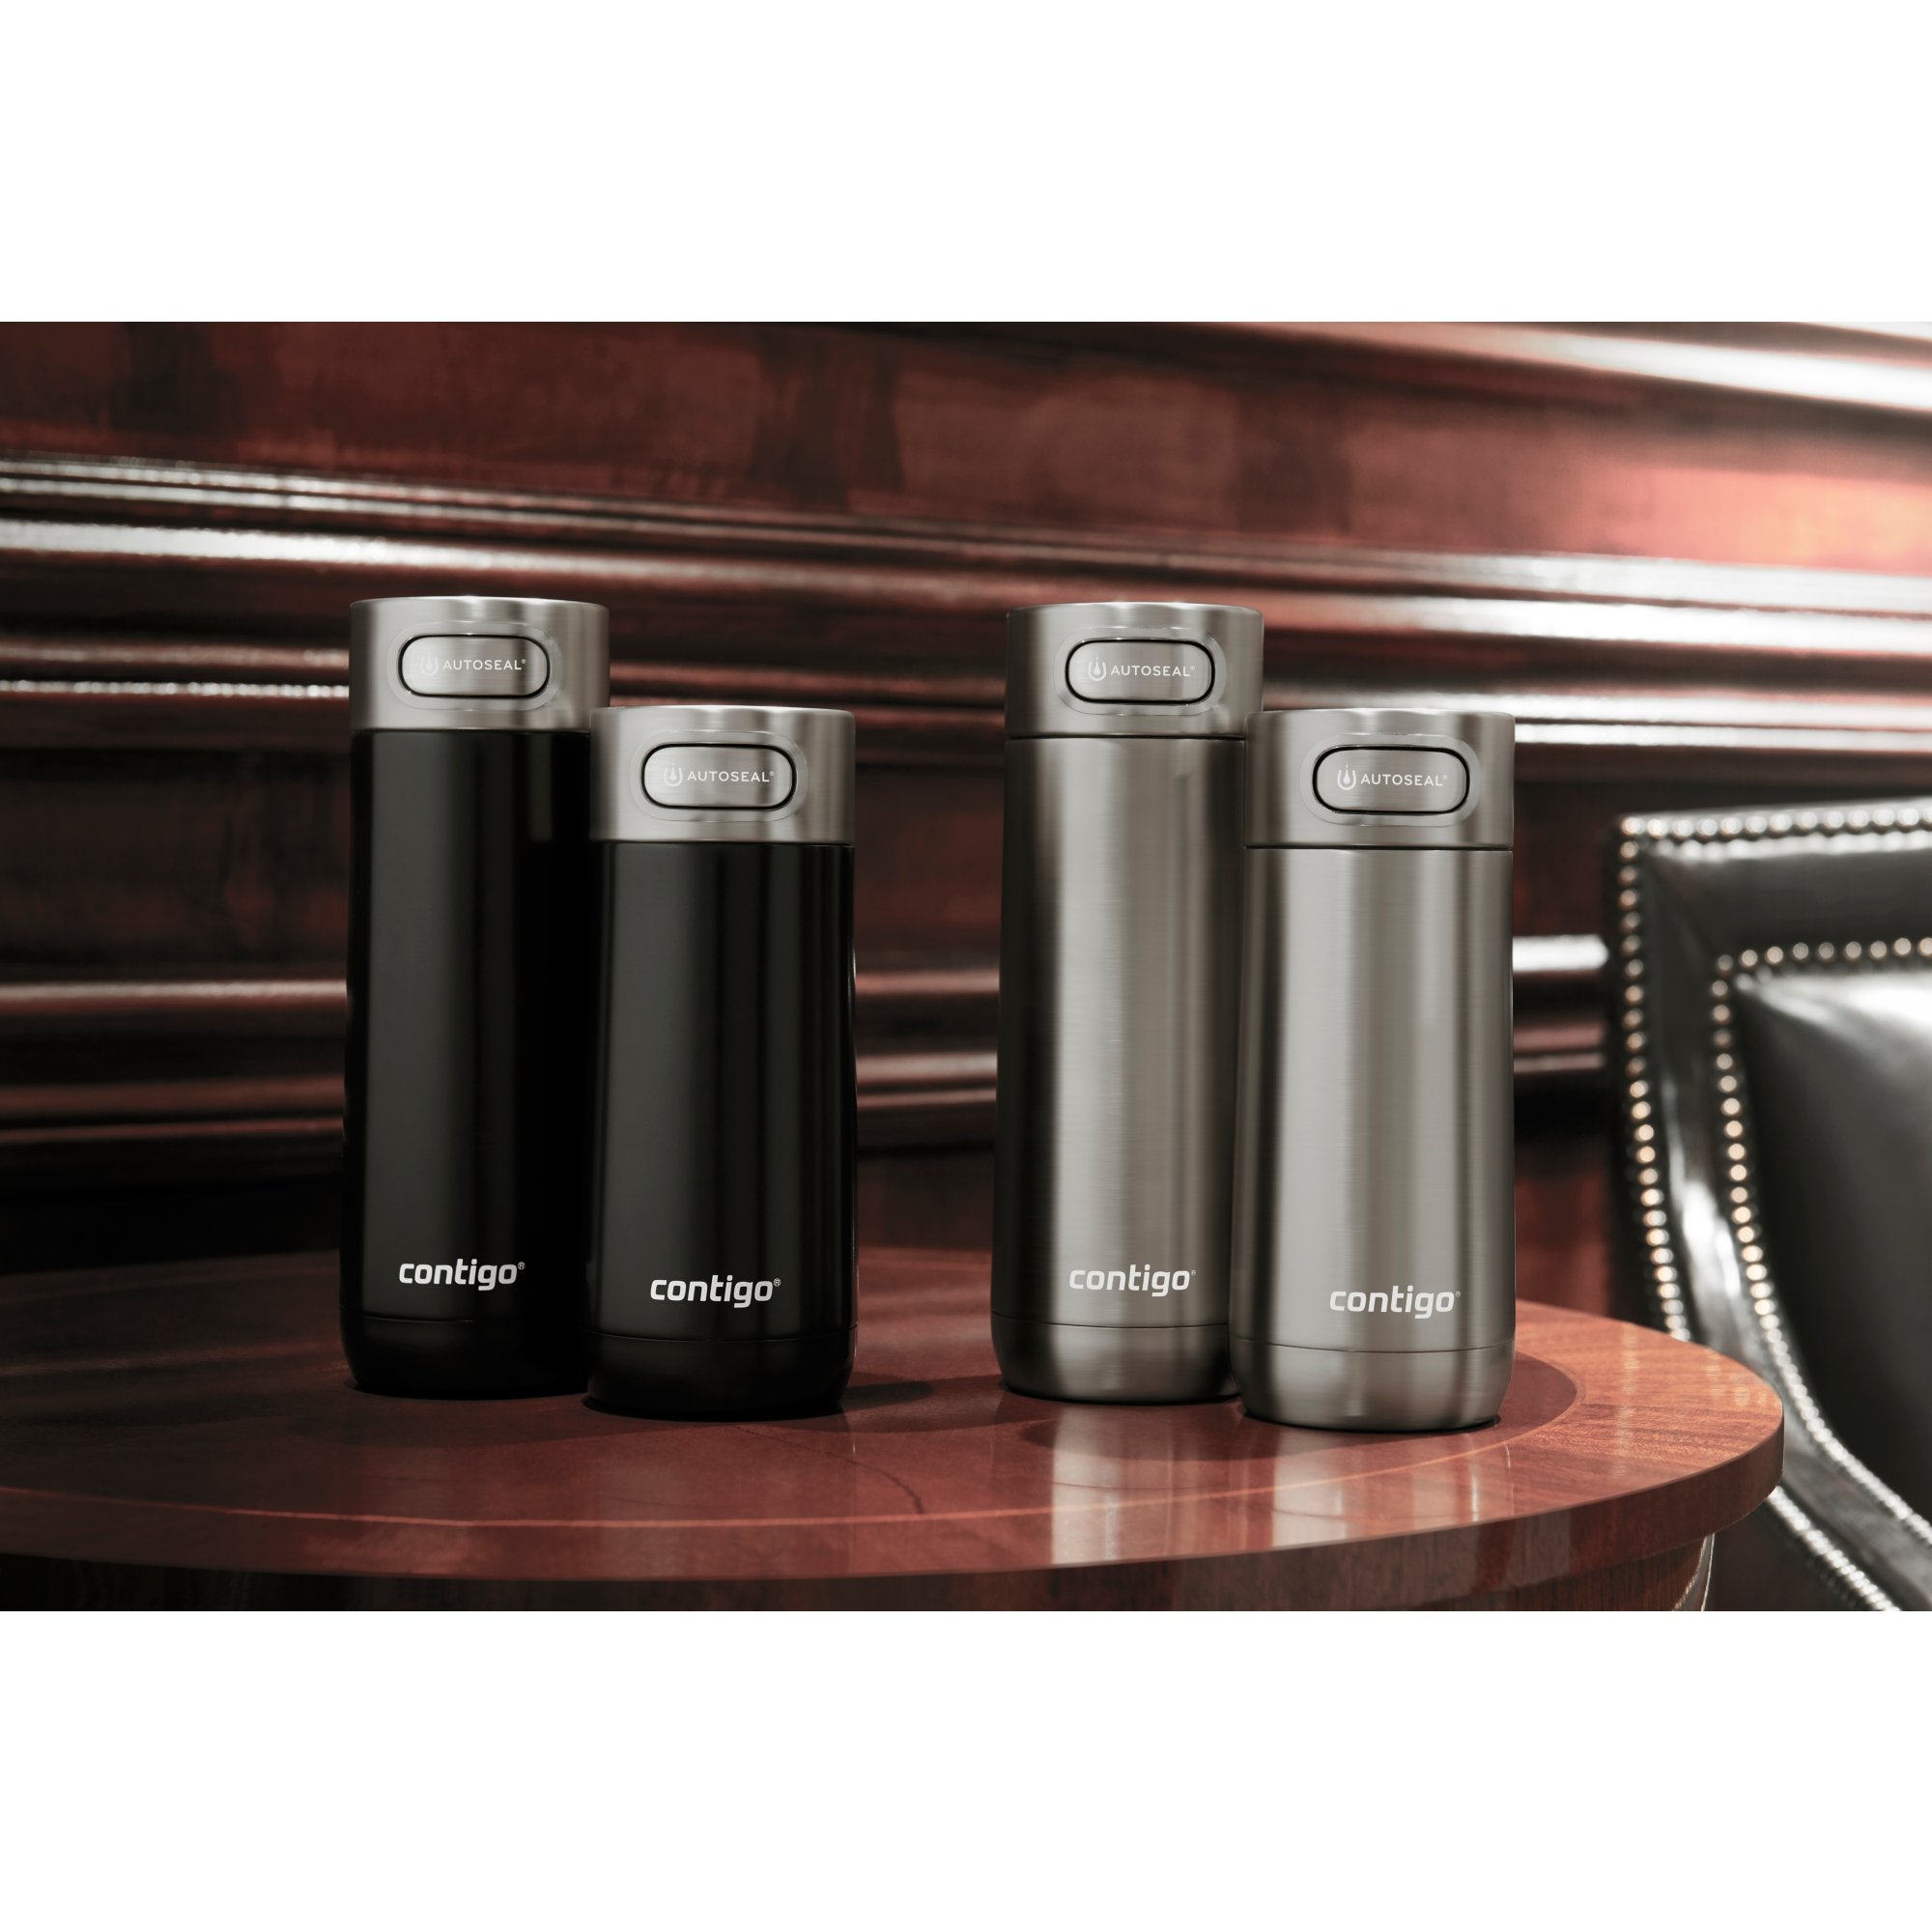 Contigo 16 Oz Luxe Autoseal Vacuum-insulated Coffee Travel Mug Spill-proof  with Stainless Steel Thermalock Double-wall Insulation, Biscay Bay 